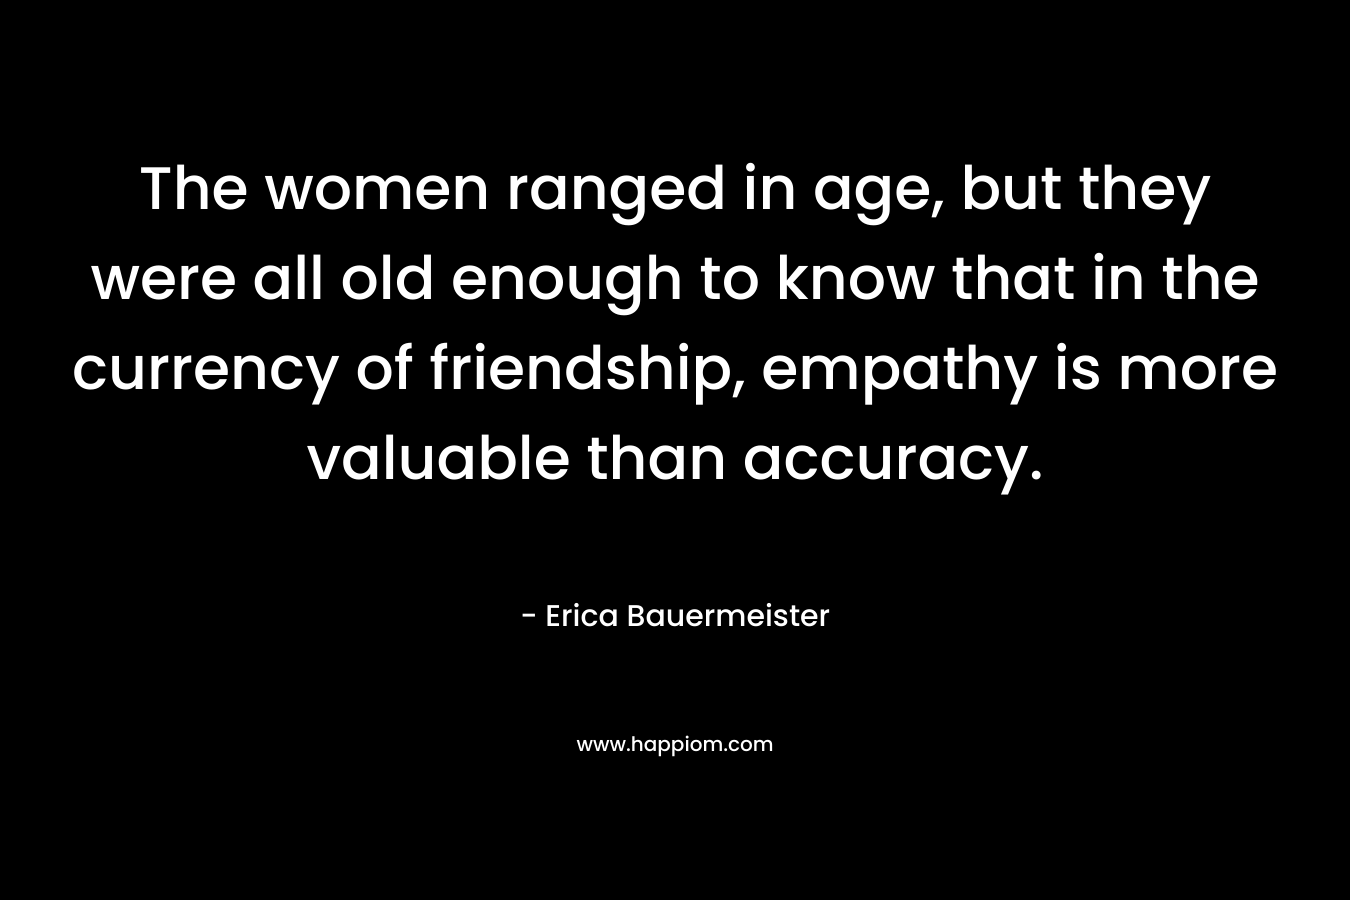 The women ranged in age, but they were all old enough to know that in the currency of friendship, empathy is more valuable than accuracy. – Erica Bauermeister